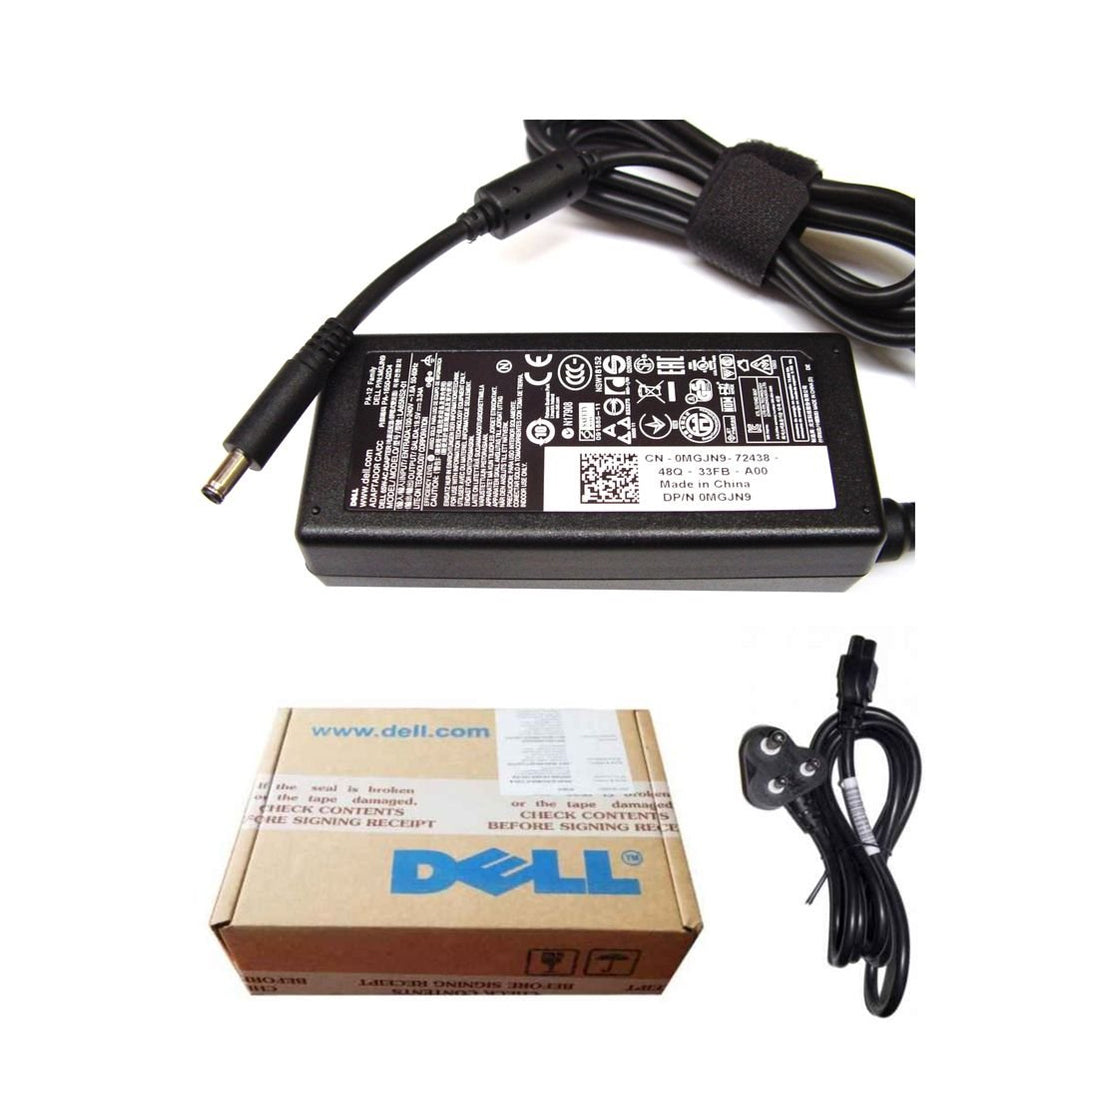 Dell Original 65W 19.5V 4.5mm Pin Laptop Charger Adapter for Inspiron Desktop 3252 With Power Cord